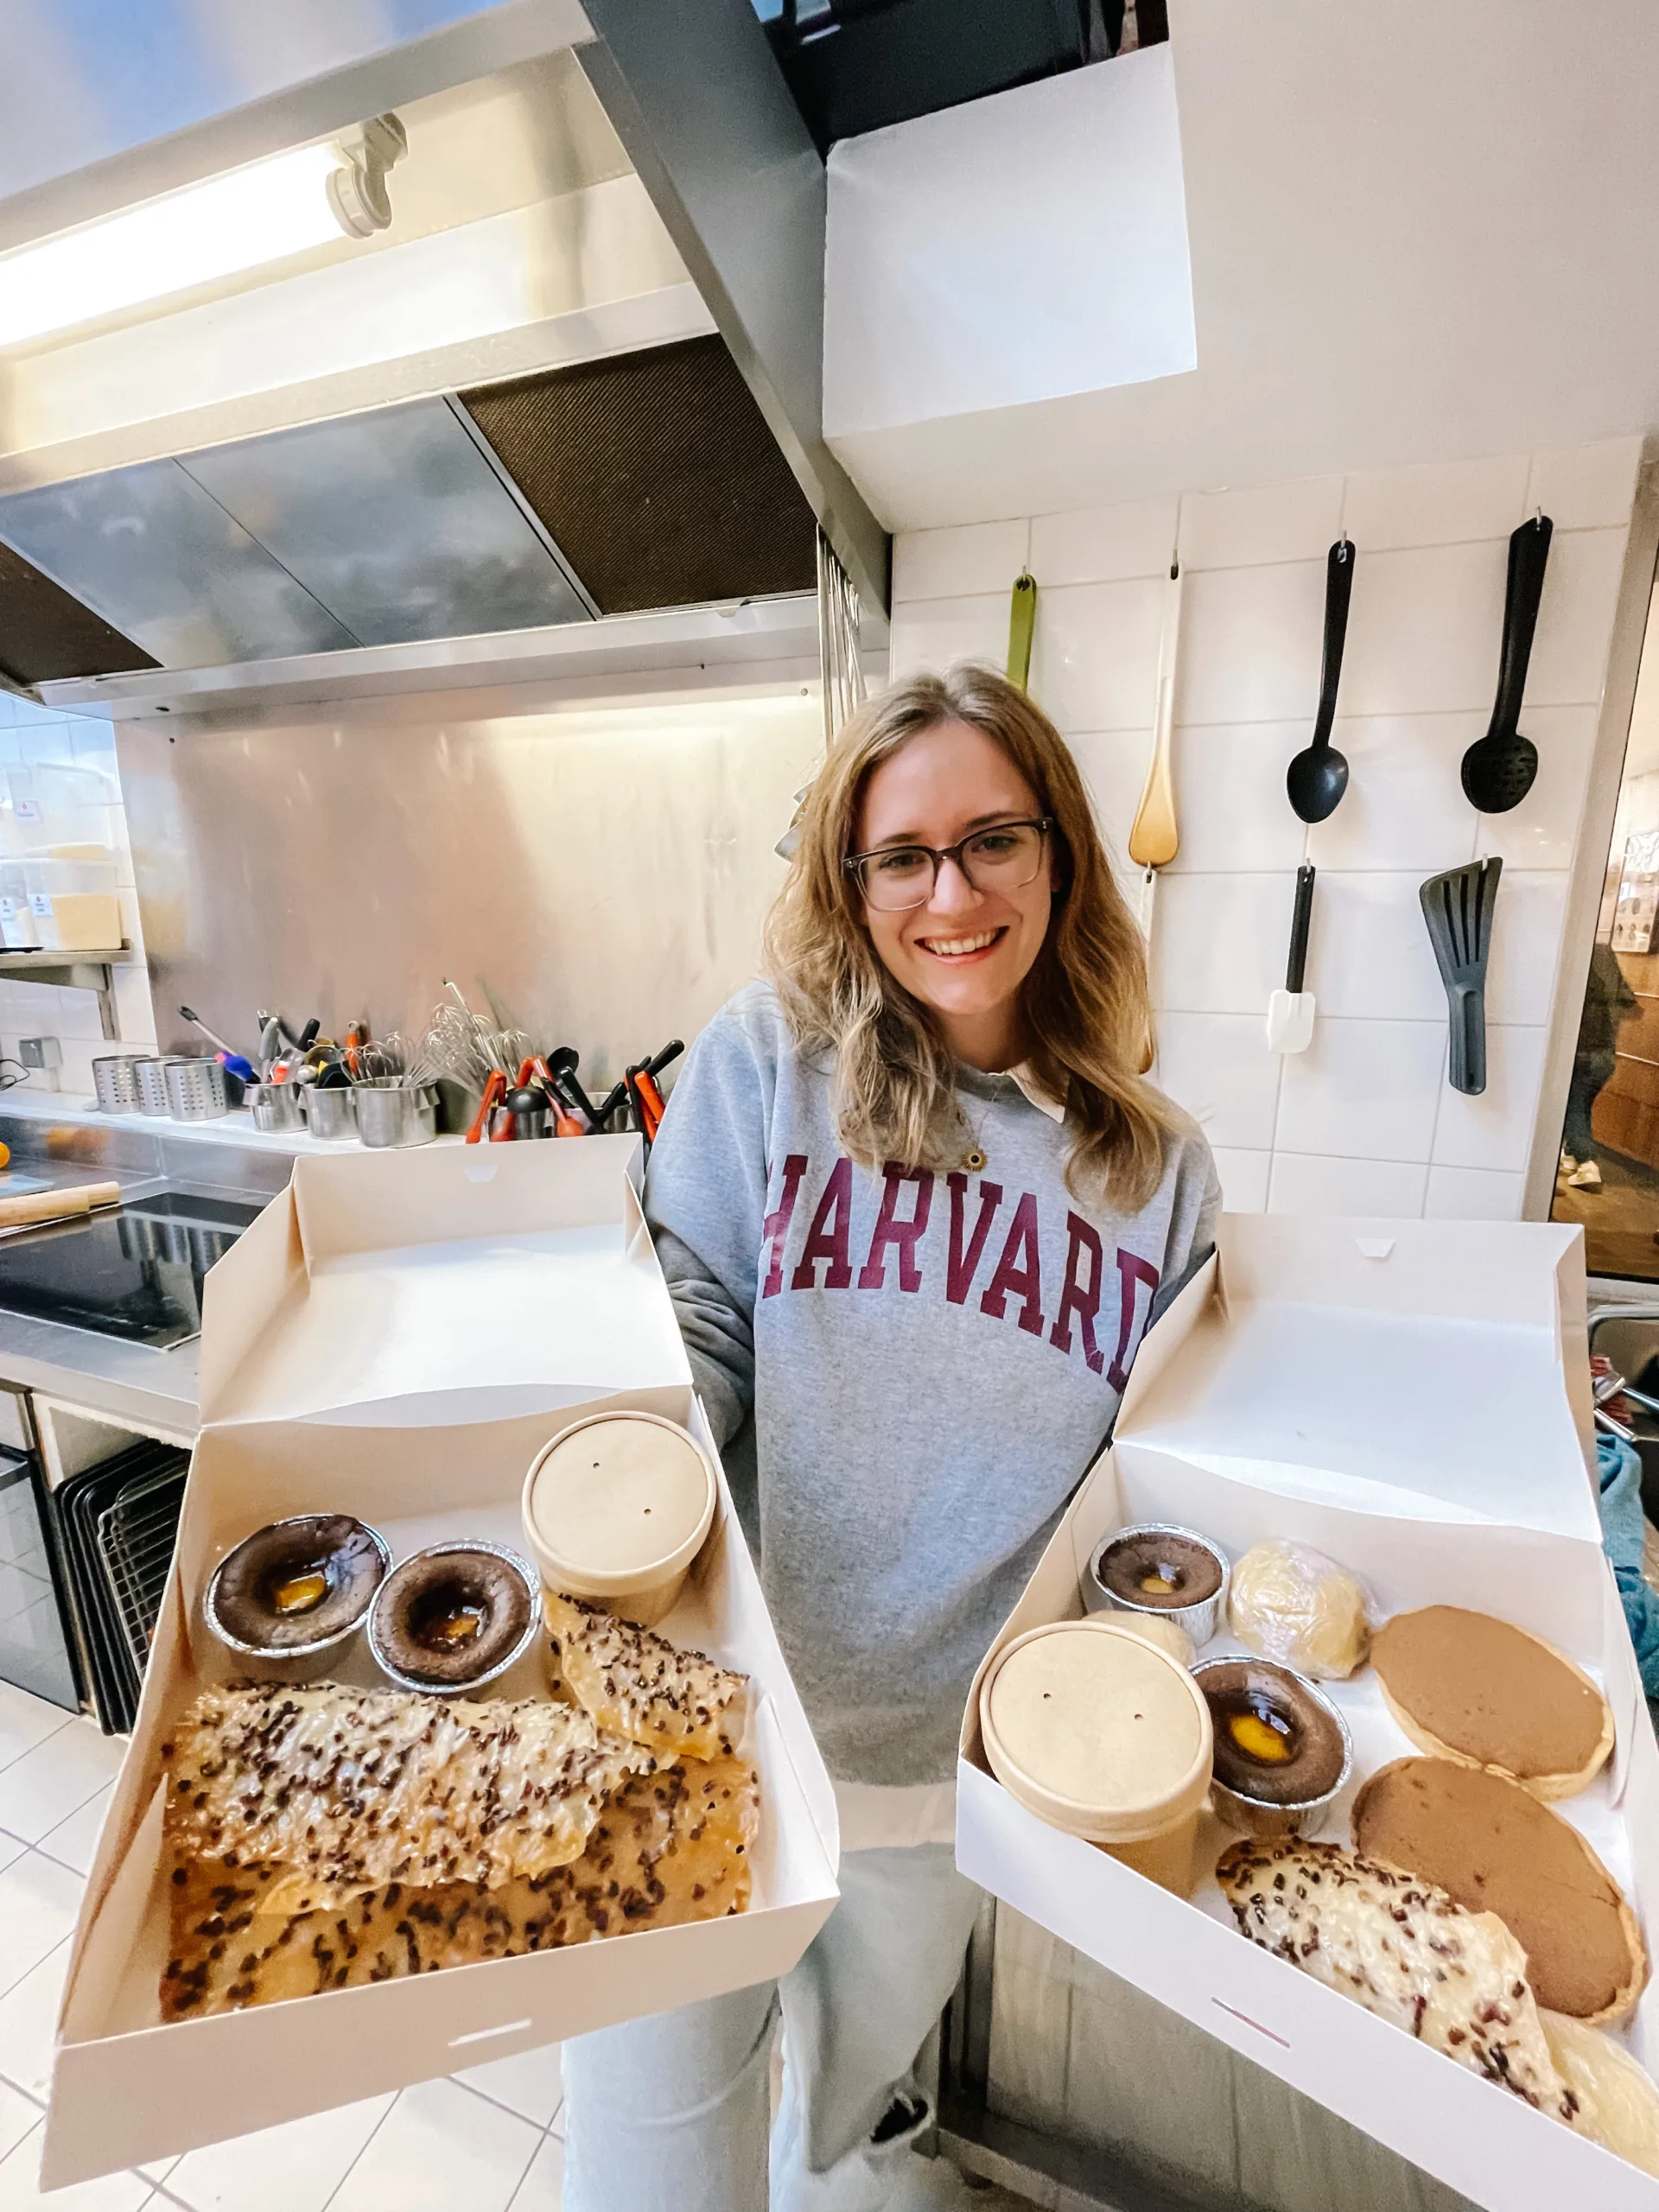 A girl stands holding 2 boxes of freshly baked baked goods in a kitchen 